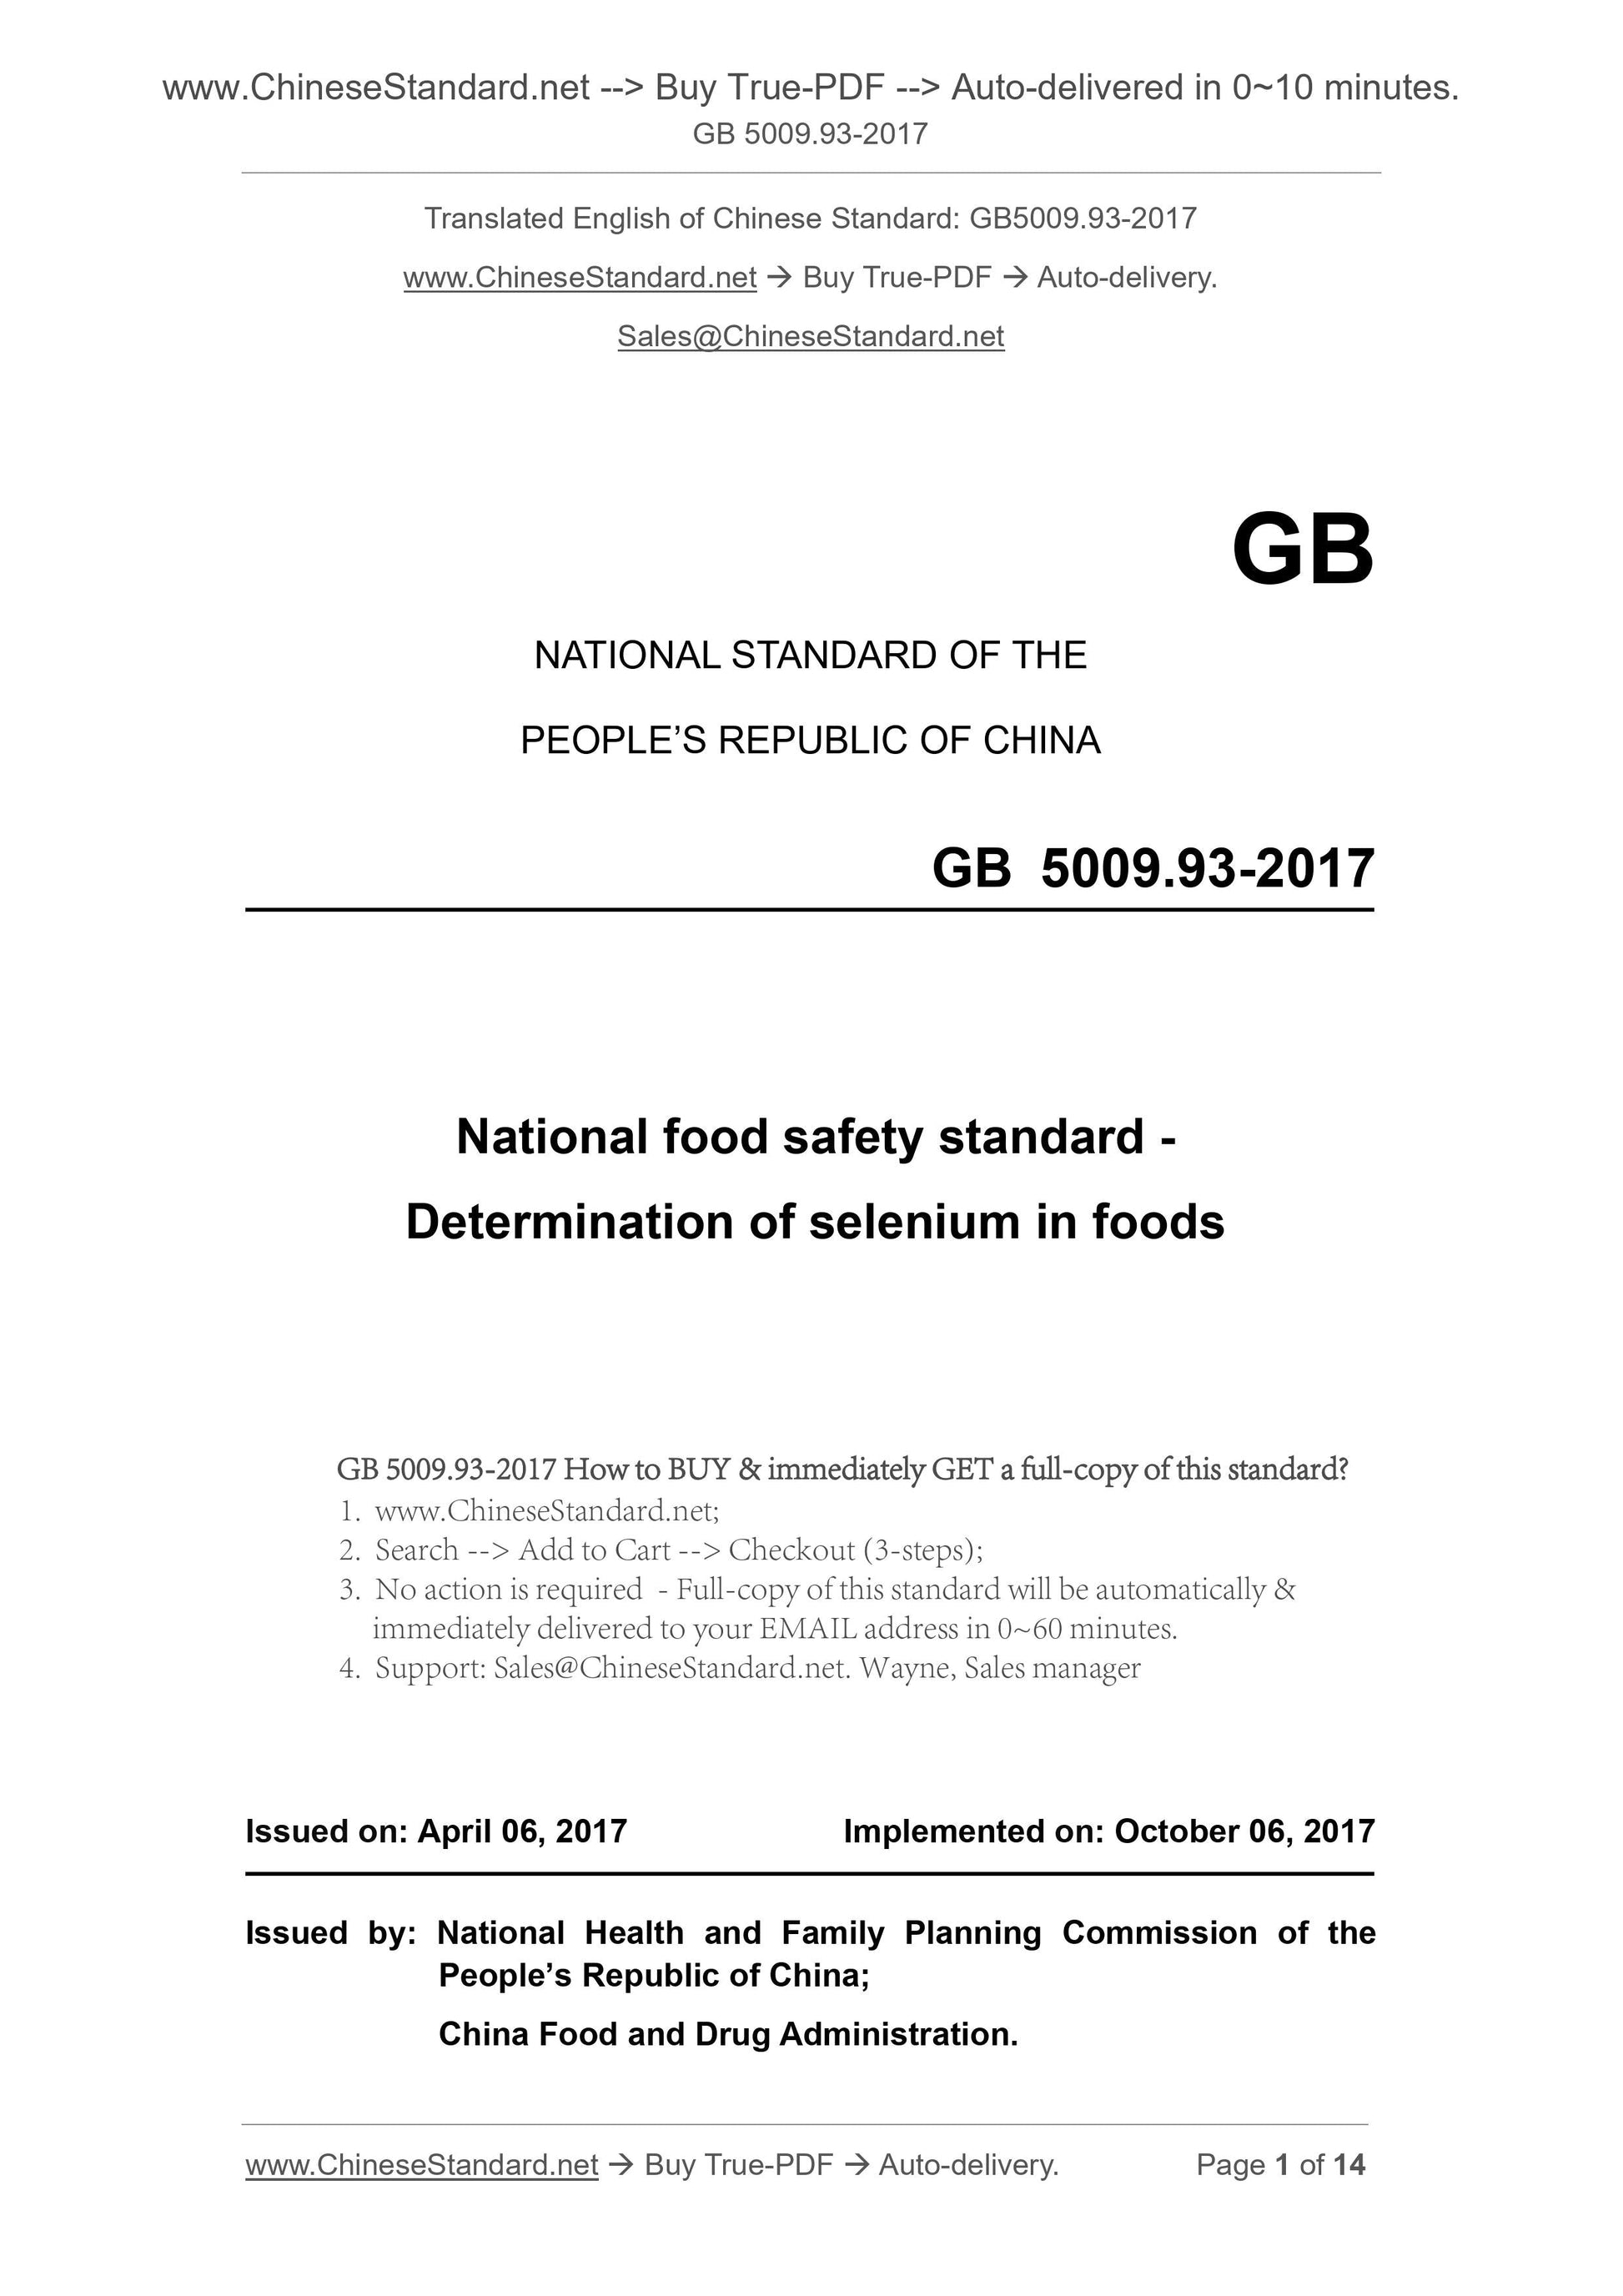 GB 5009.93-2017 Page 1